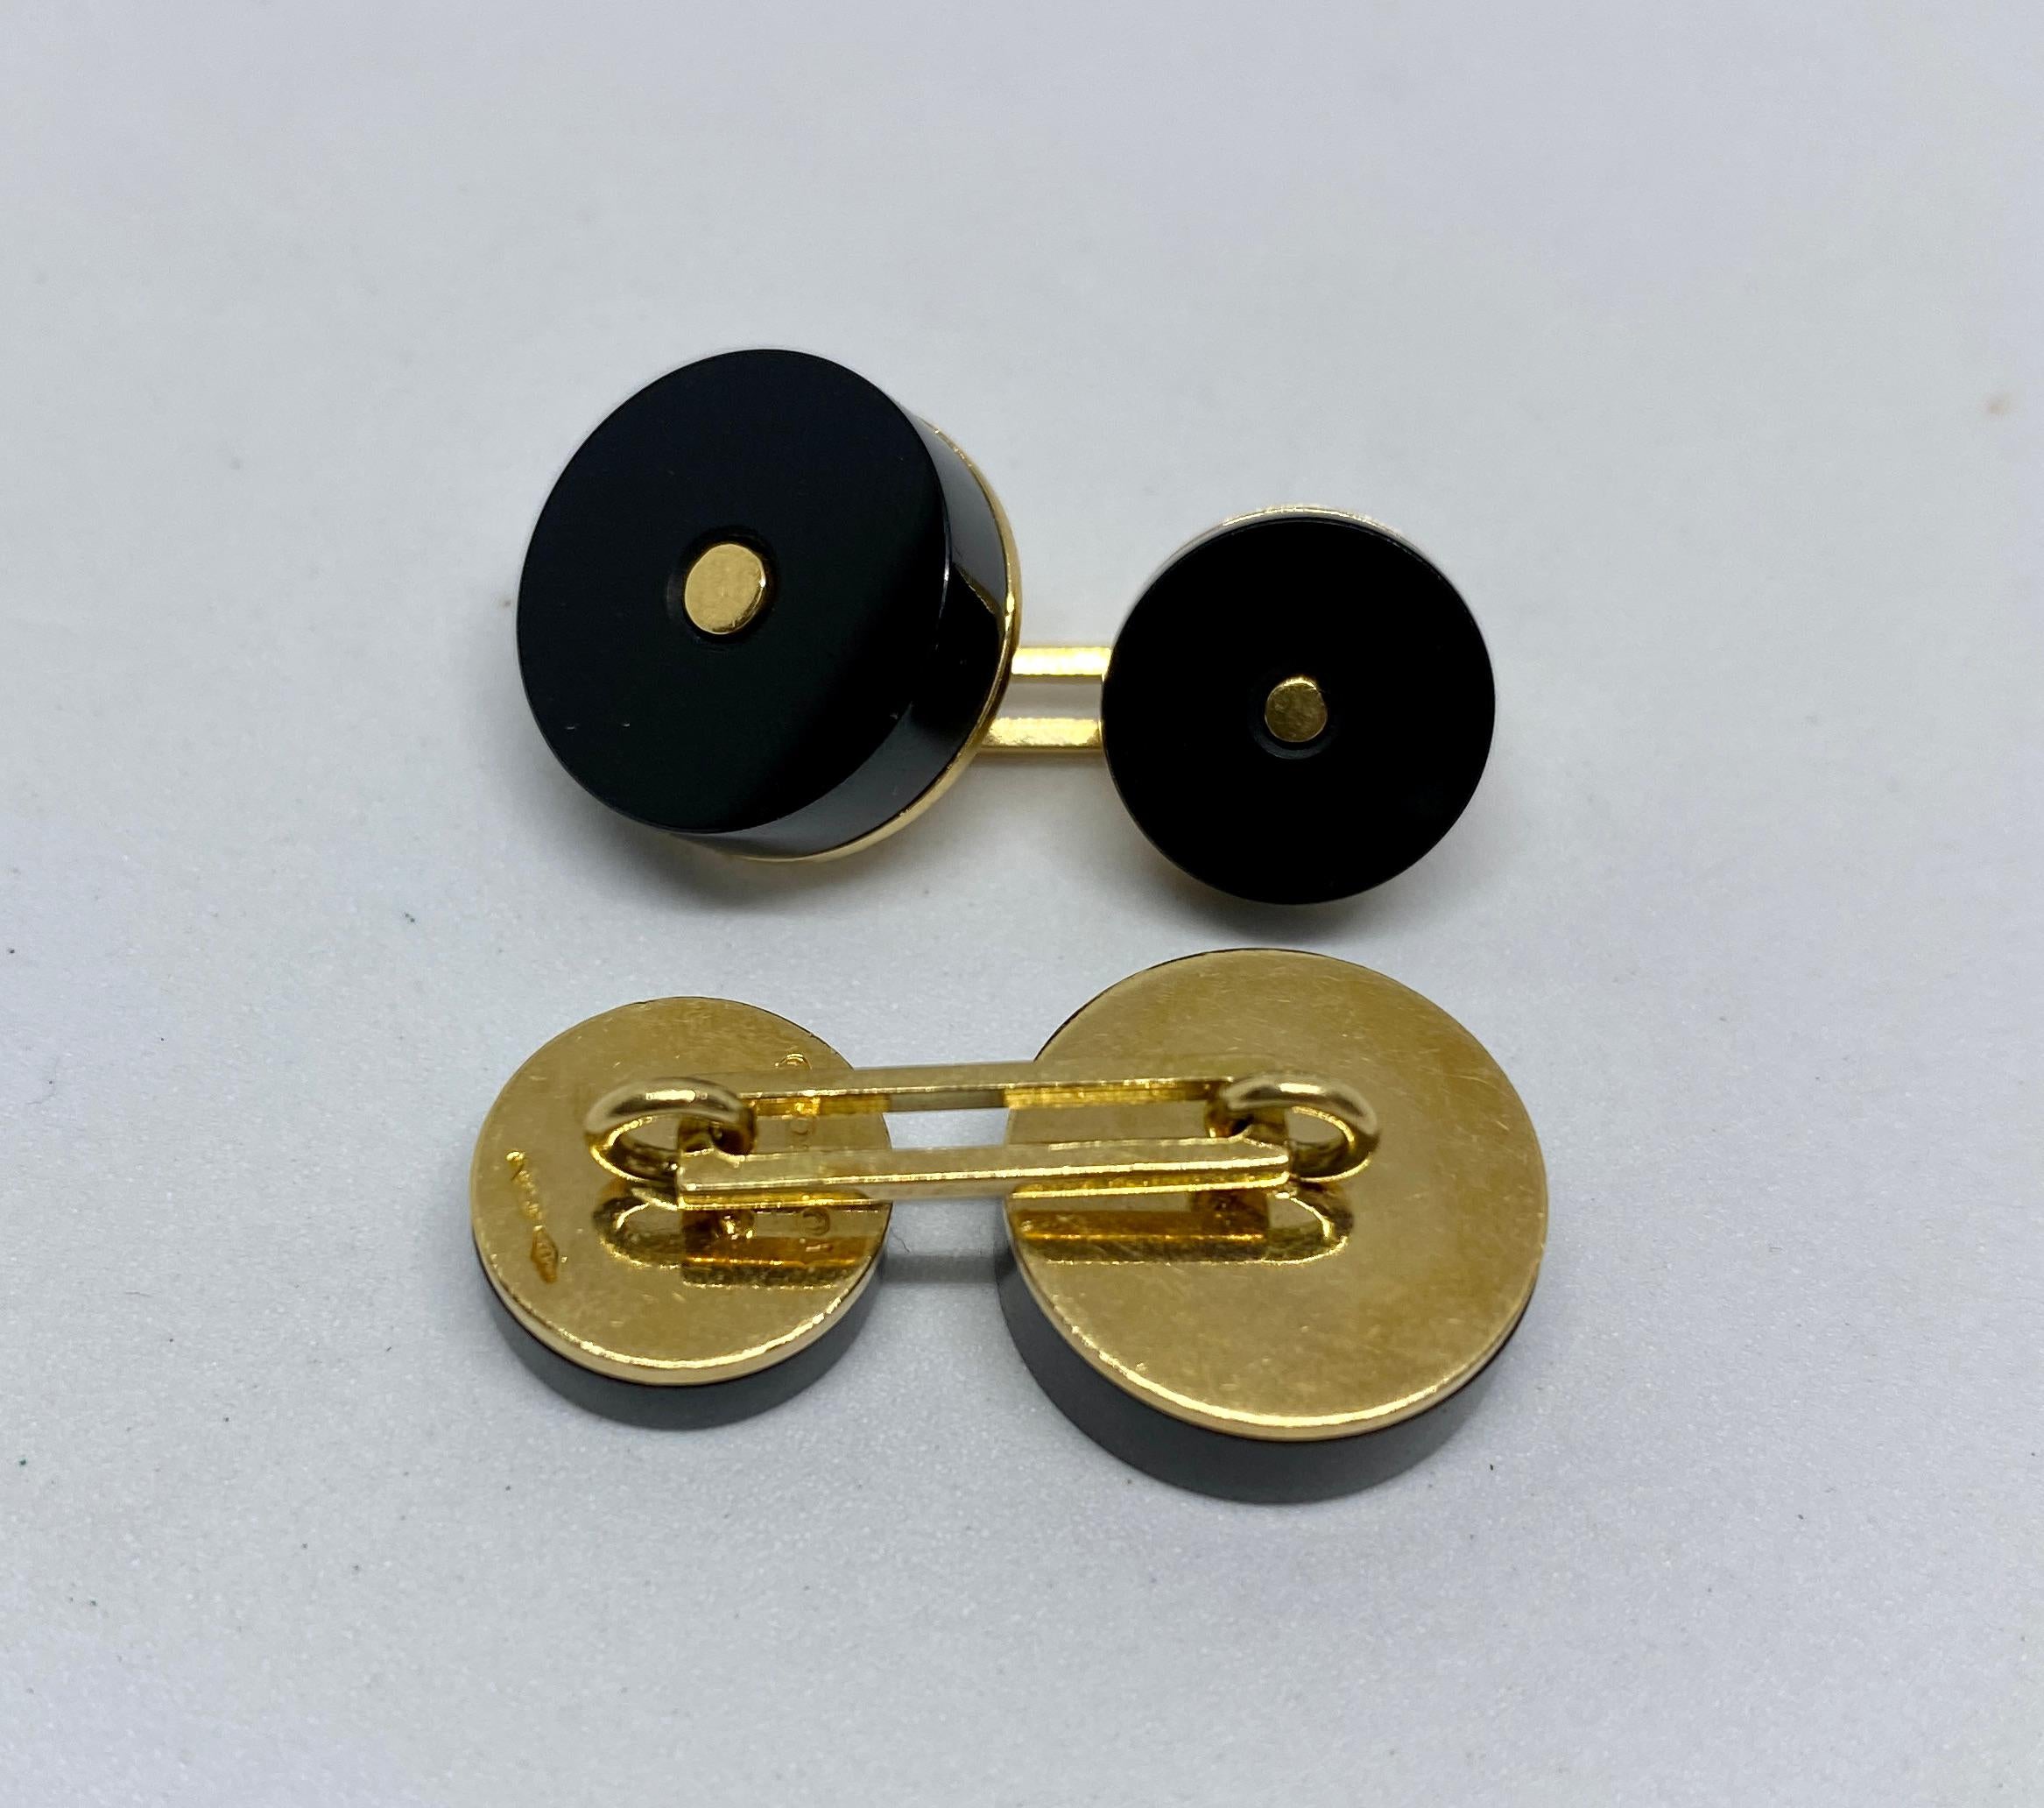 Extremely rare cufflinks by Tom Ford, these manage to be classic, modern and cool at the same time.

Rendered in solid 18K yellow gold with black onyx discs, the fronts measure 14.1mm in diameter while their mates measure 11.2mm in diameter. Besides